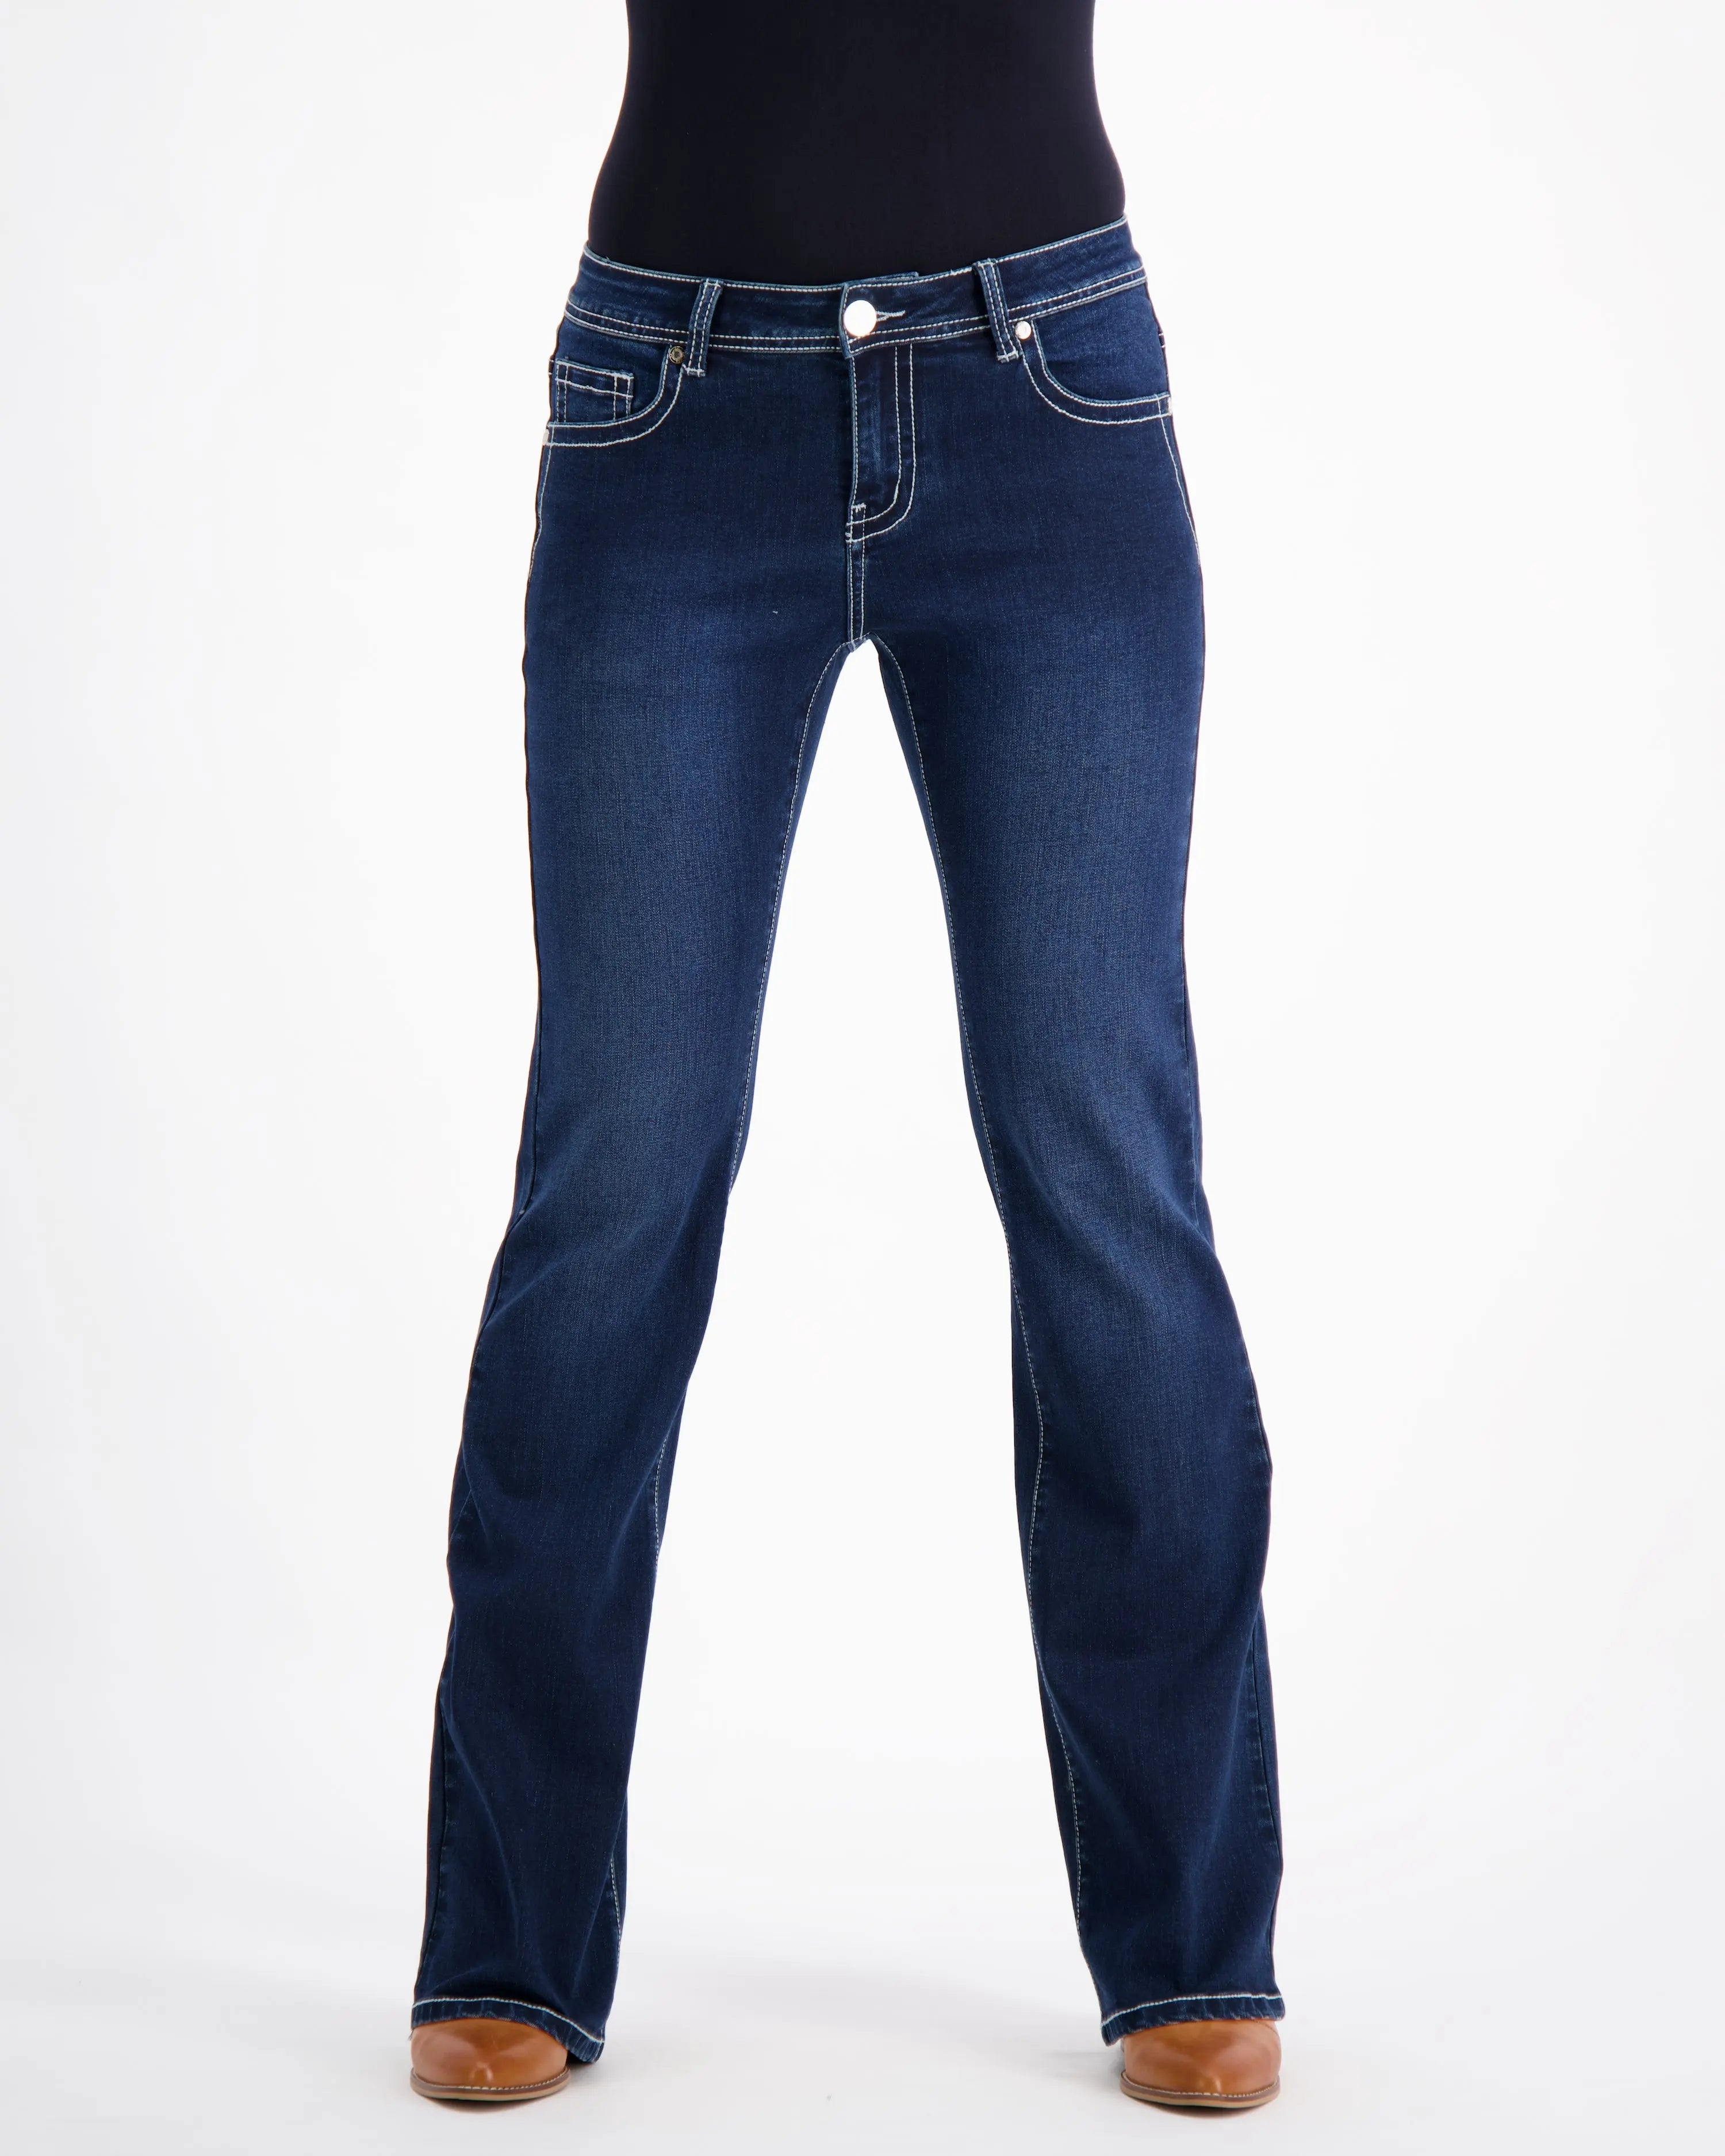 Western Jeans | Outback Supply Co | Premium stretch denim jeans